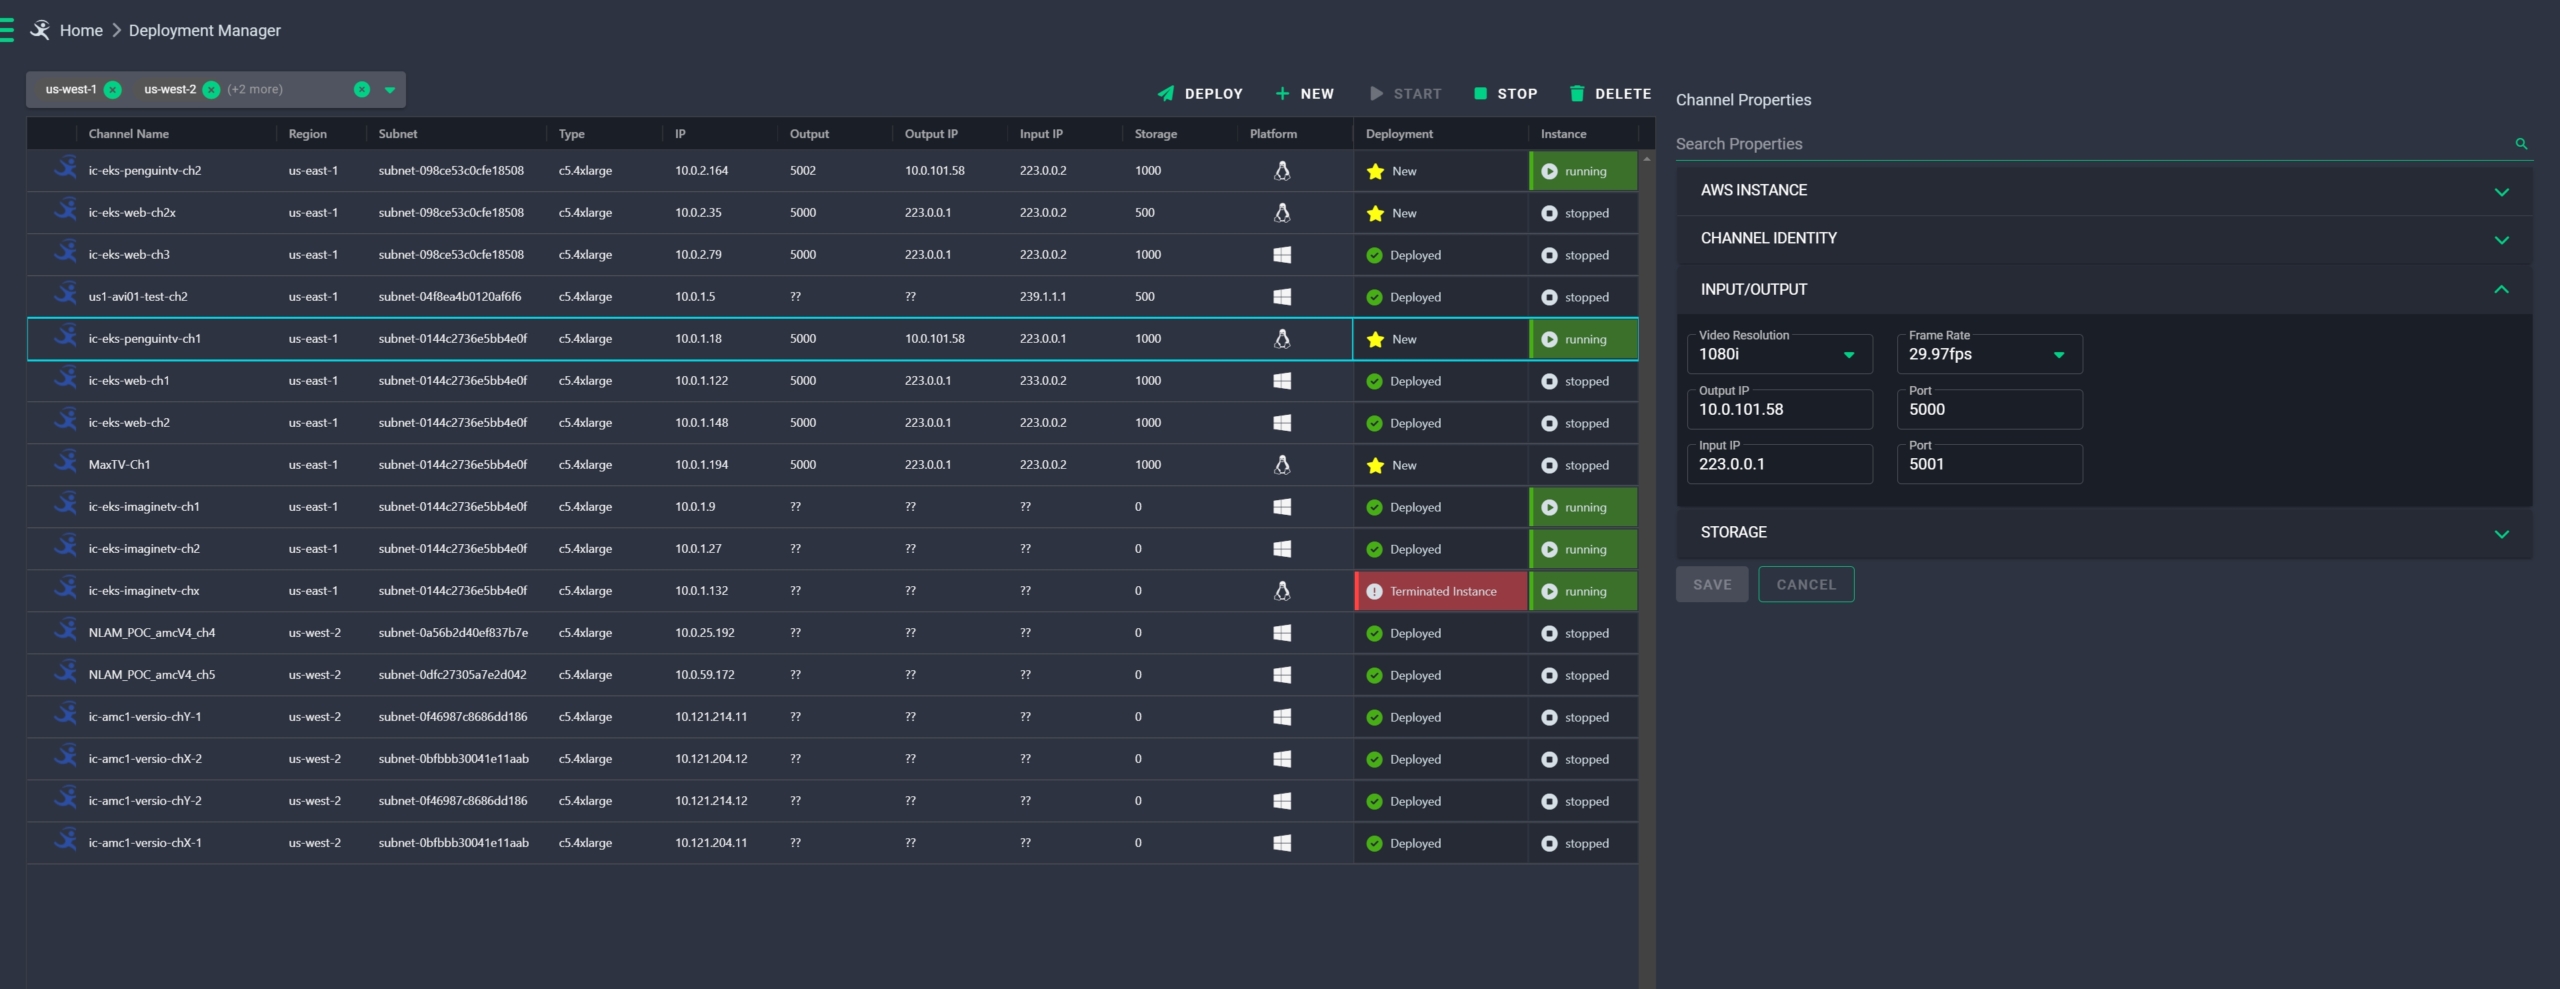 A screen of the Aviator deploymanager